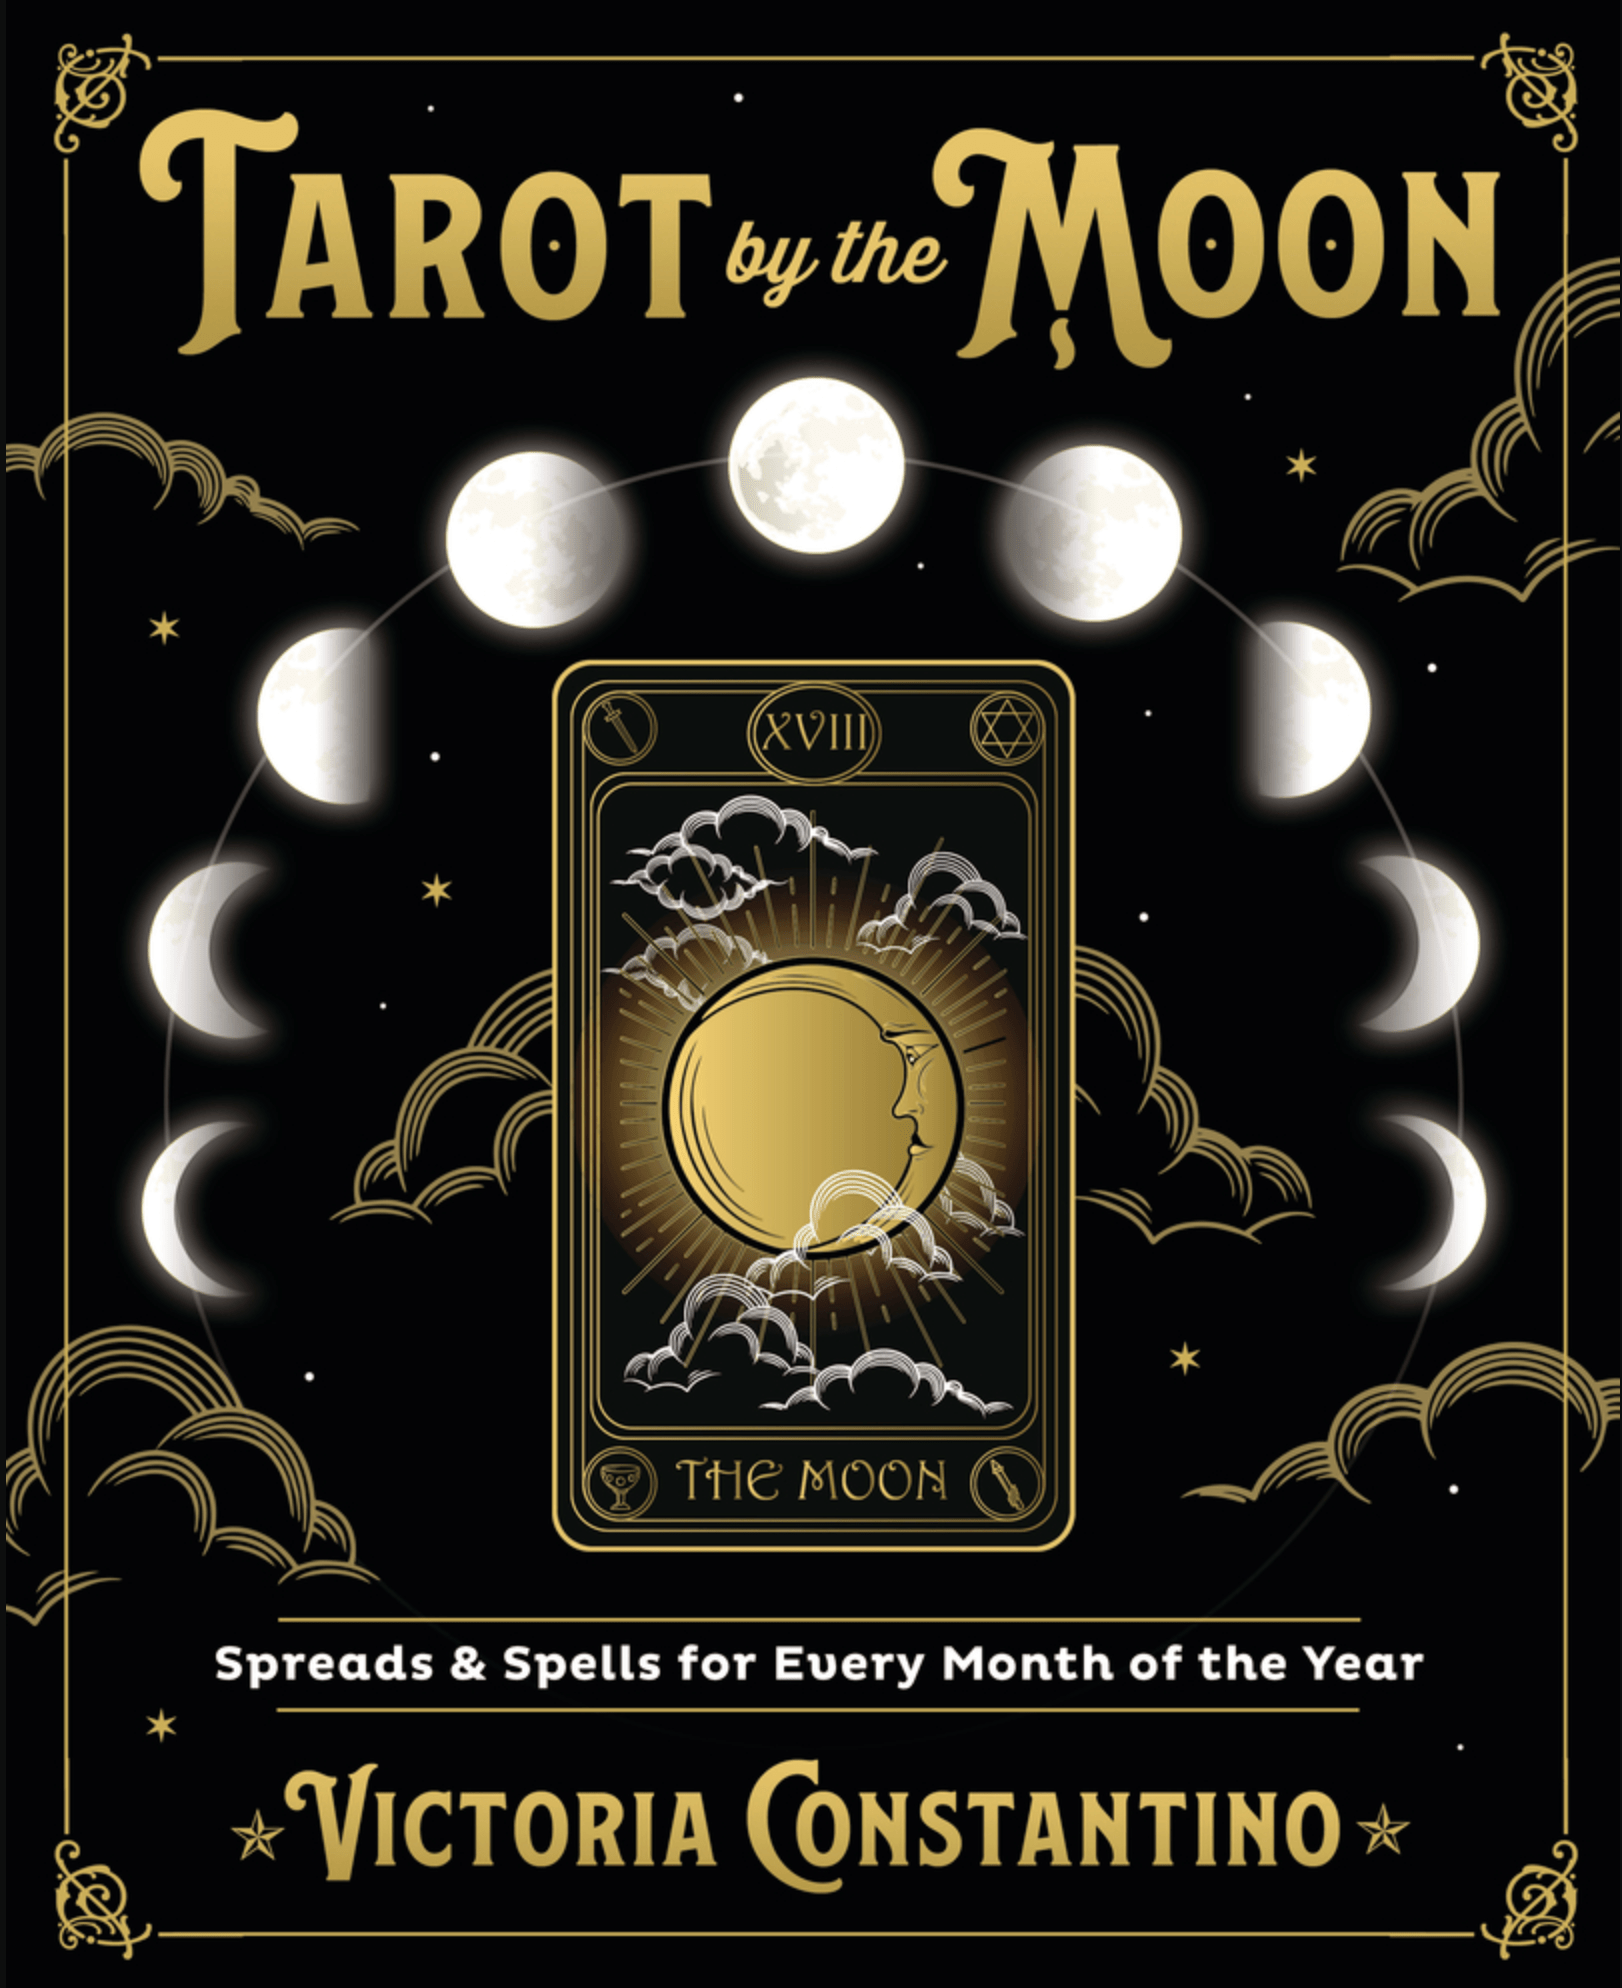 Tarot by the Moon: Spreads and Spells for Every Month of the Year - Spiral Circle